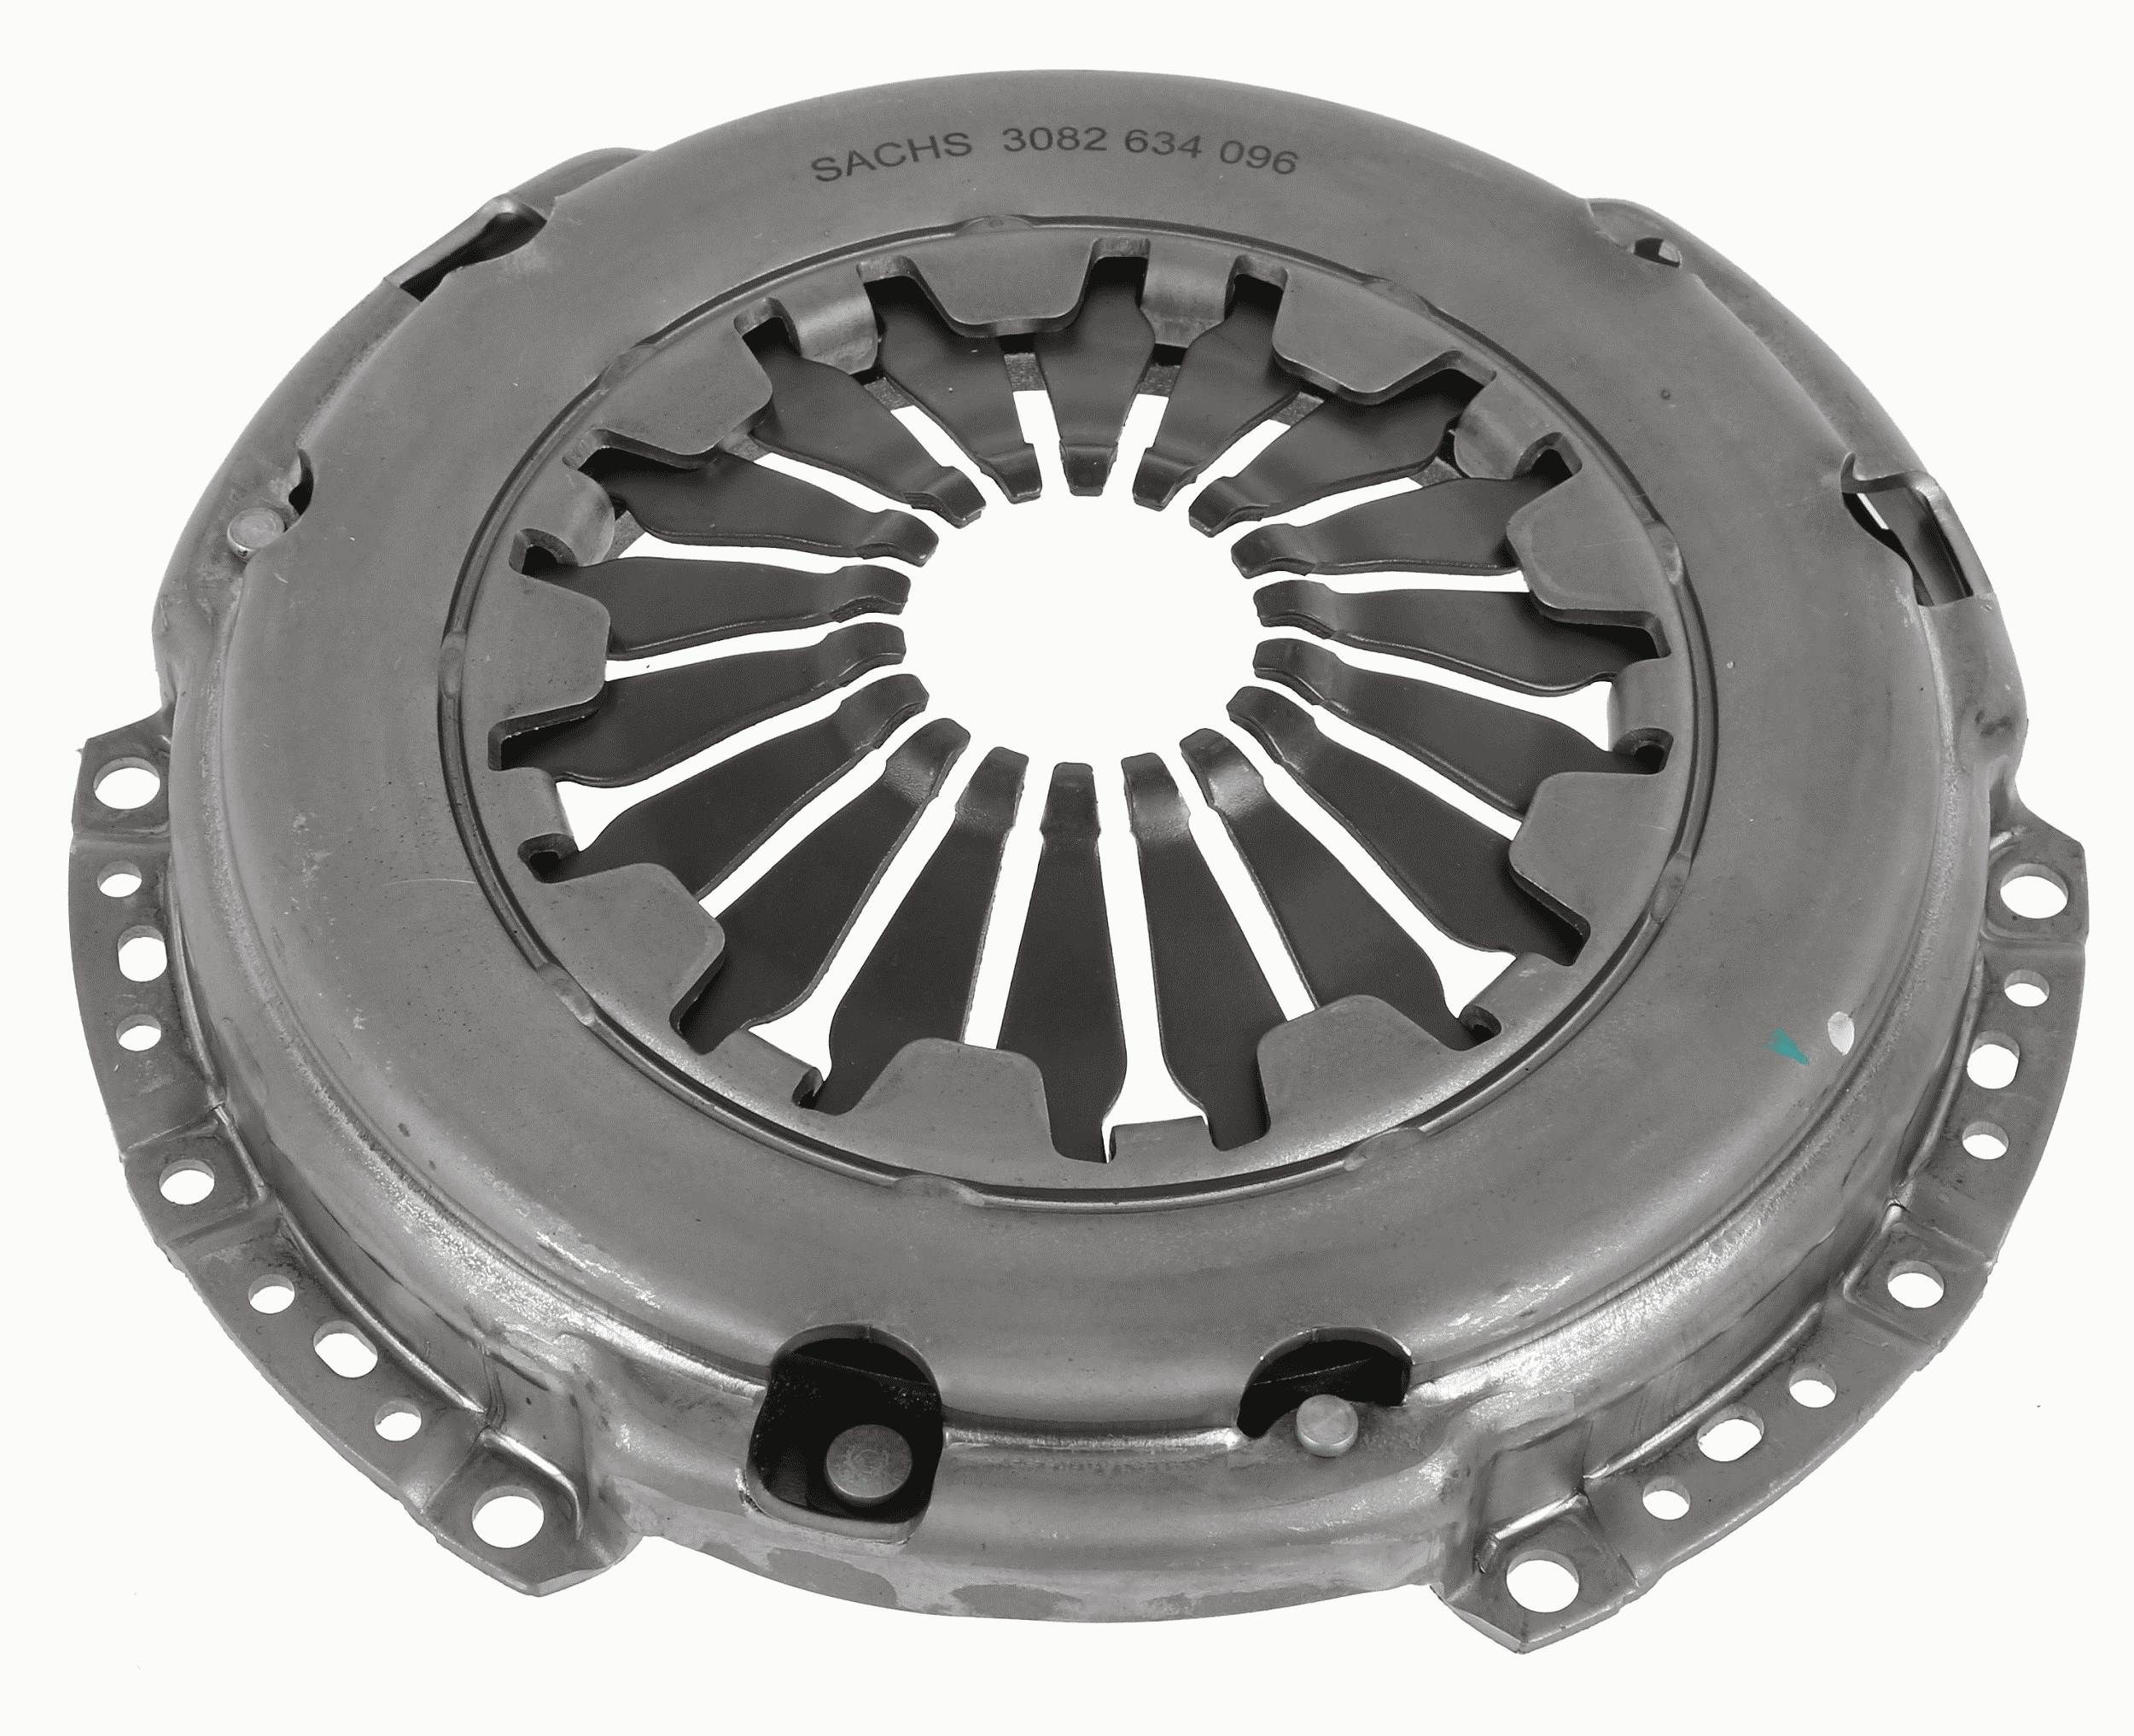 Volkswagen POLO Clutch cover pressure plate 19335557 SACHS 3082 634 096 online buy